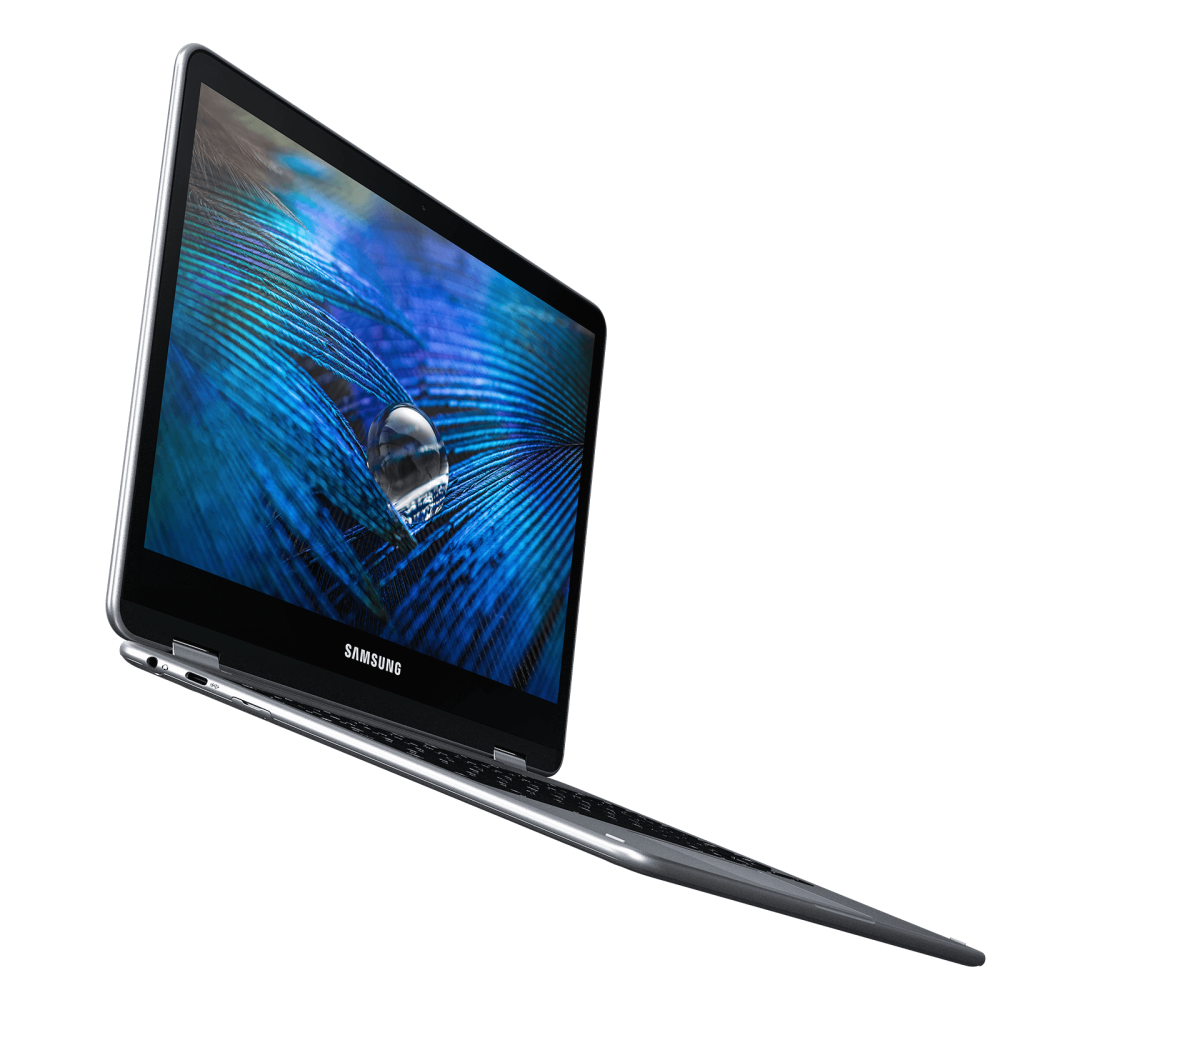 Samsung has a new high-end Chromebook with touchscreen and stylus coming soon 